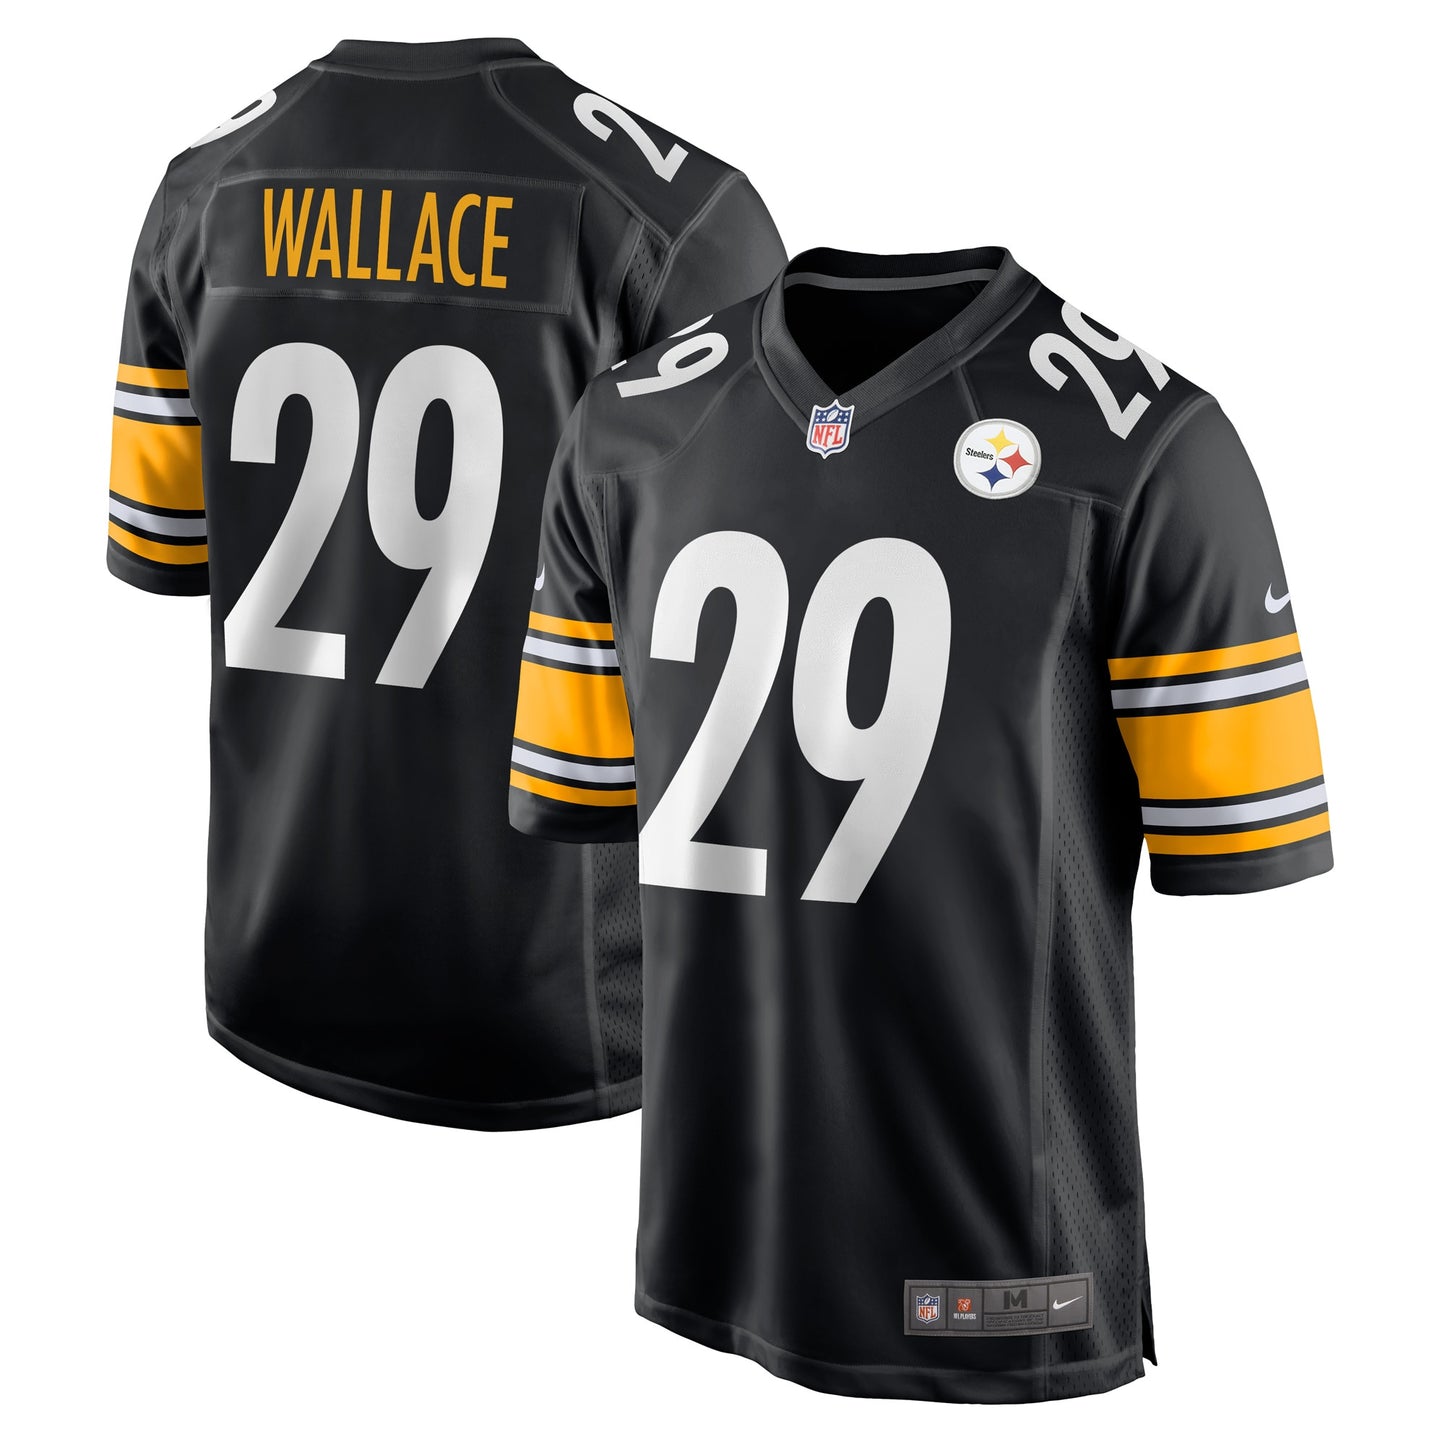 Levi Wallace Pittsburgh Steelers Nike Game Player Jersey - Black